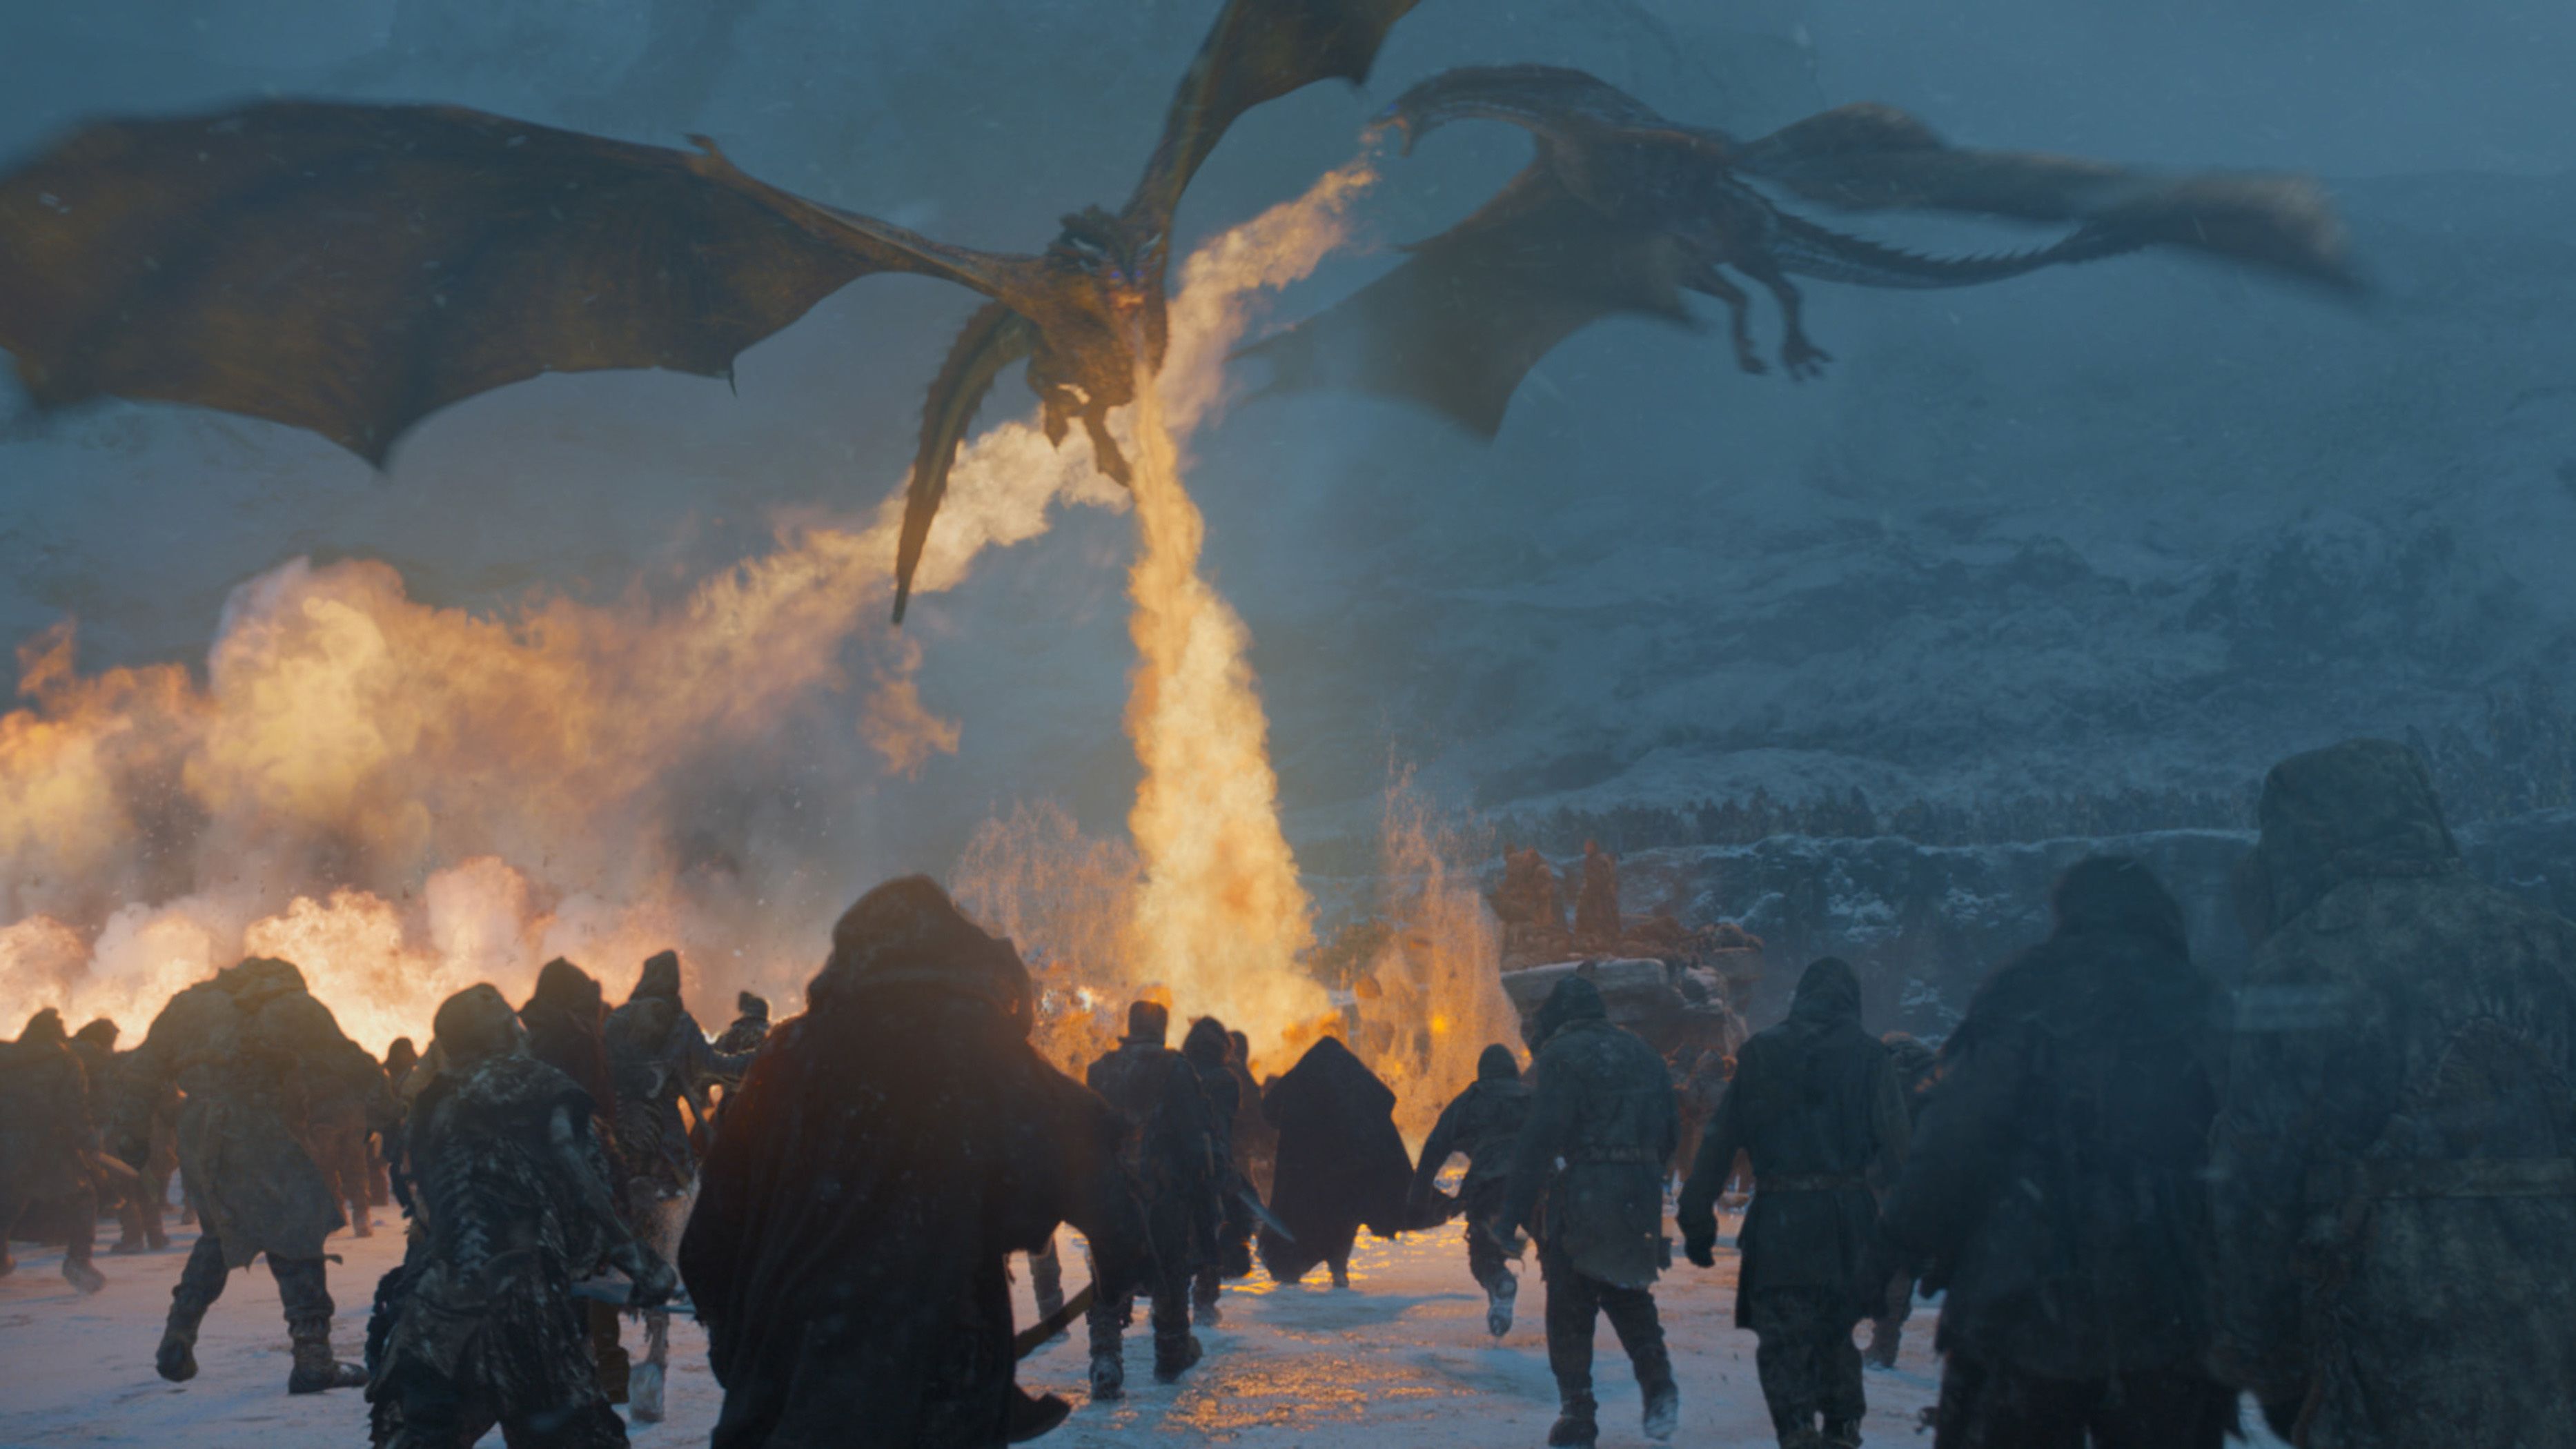 Game of Thrones' timeline: All the major events, plus prequel history